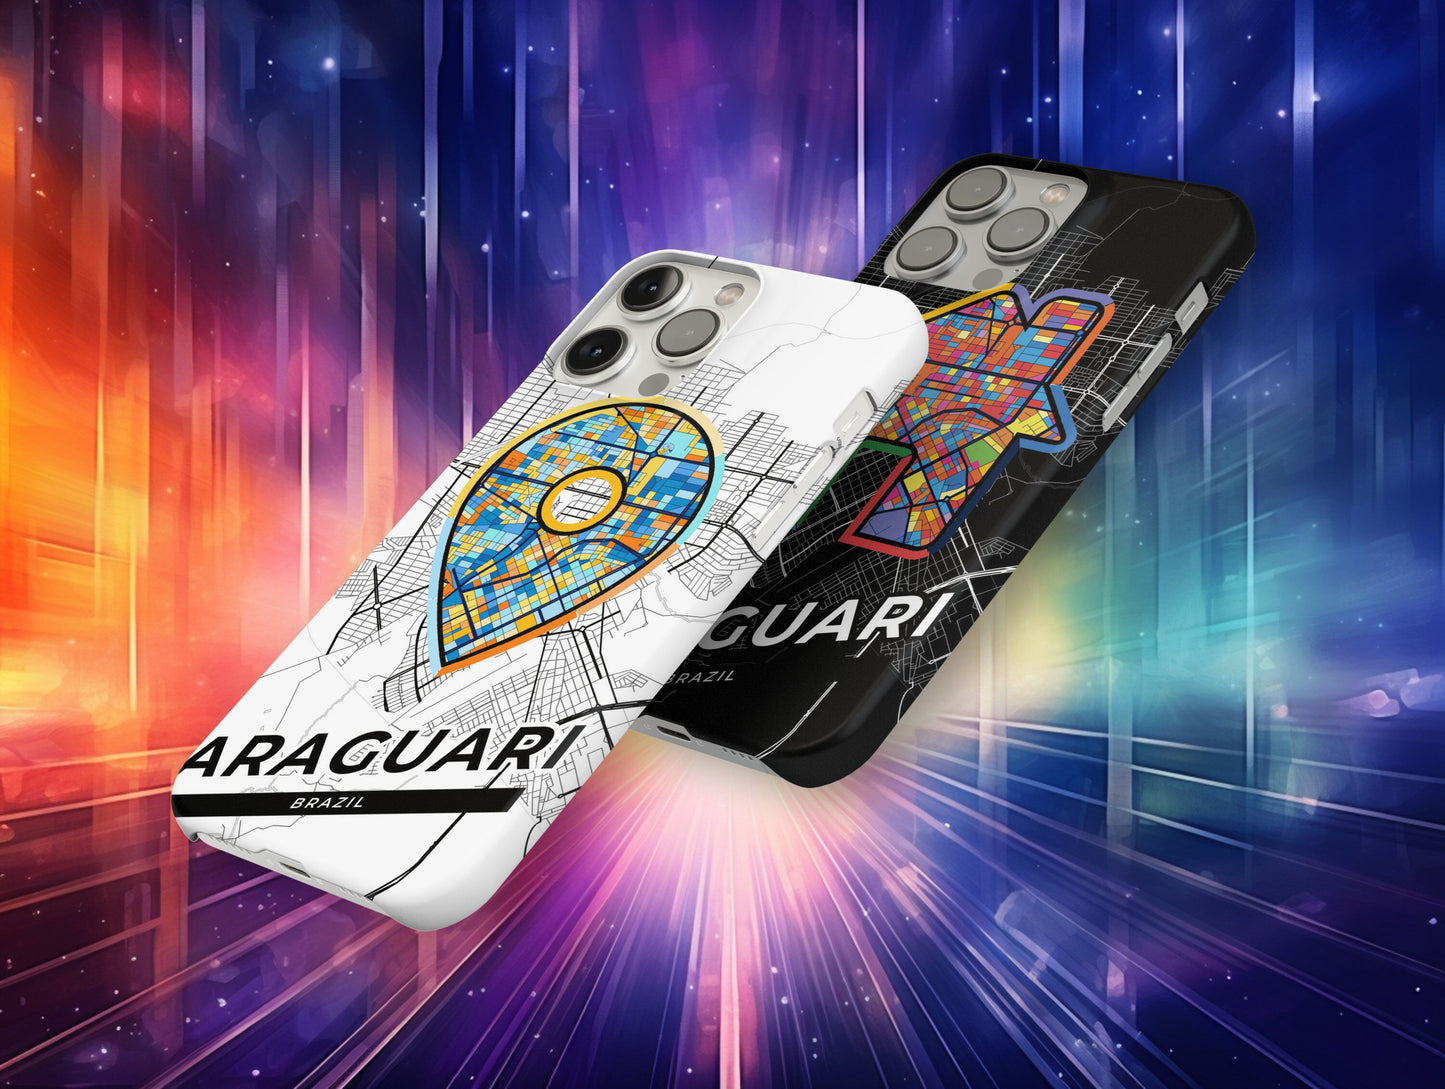 Araguari Brazil slim phone case with colorful icon. Birthday, wedding or housewarming gift. Couple match cases.